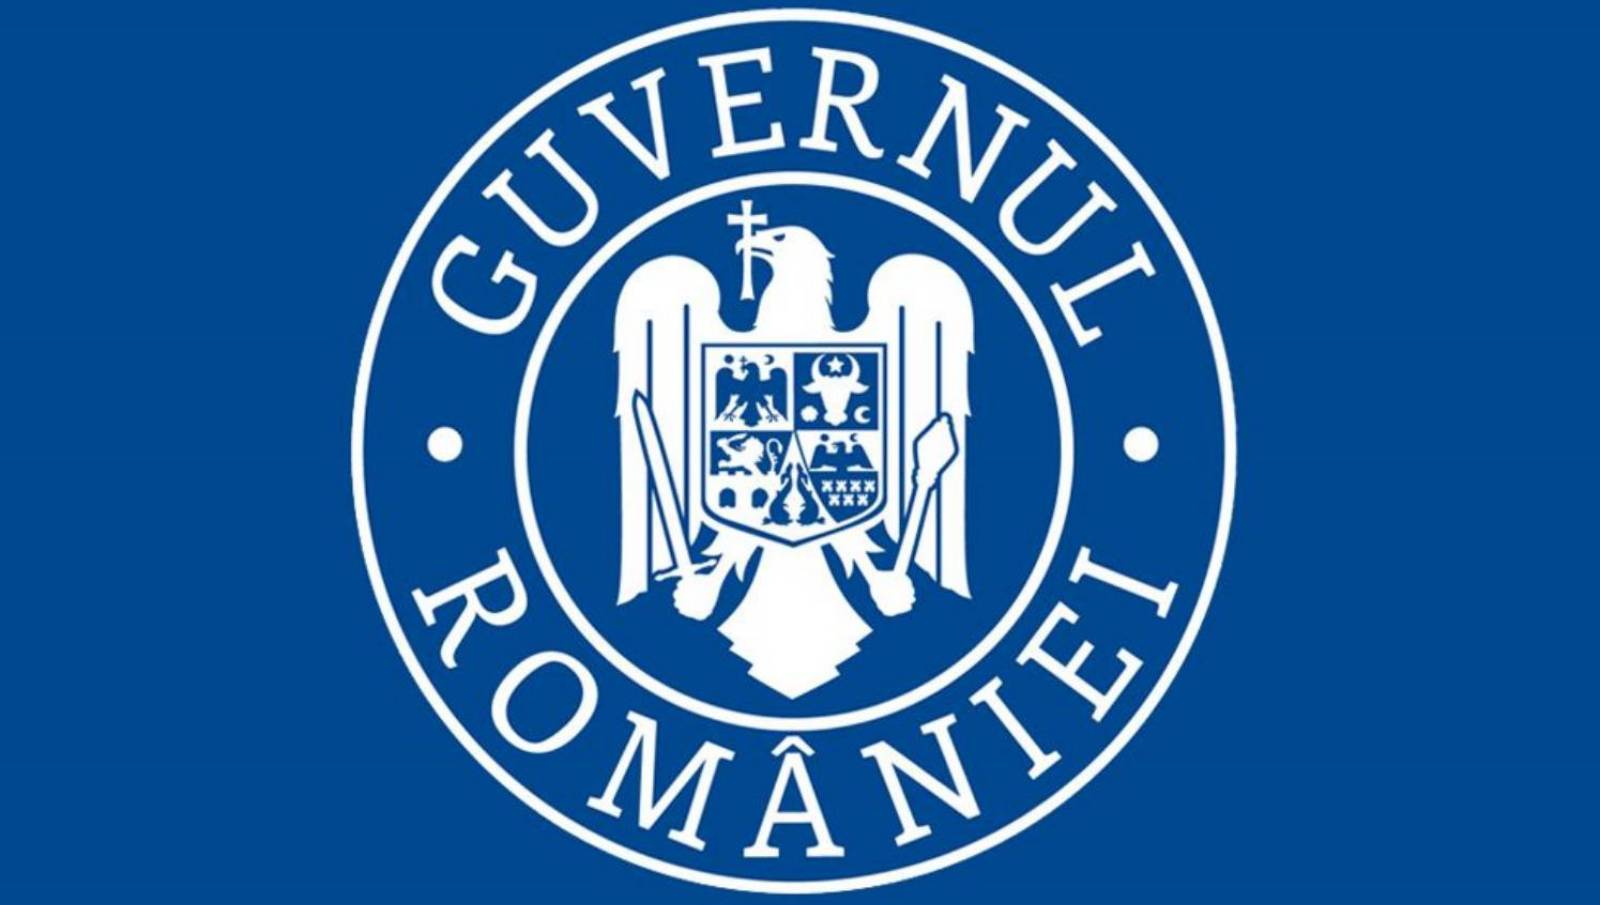 The Romanian government partially reopened restaurants